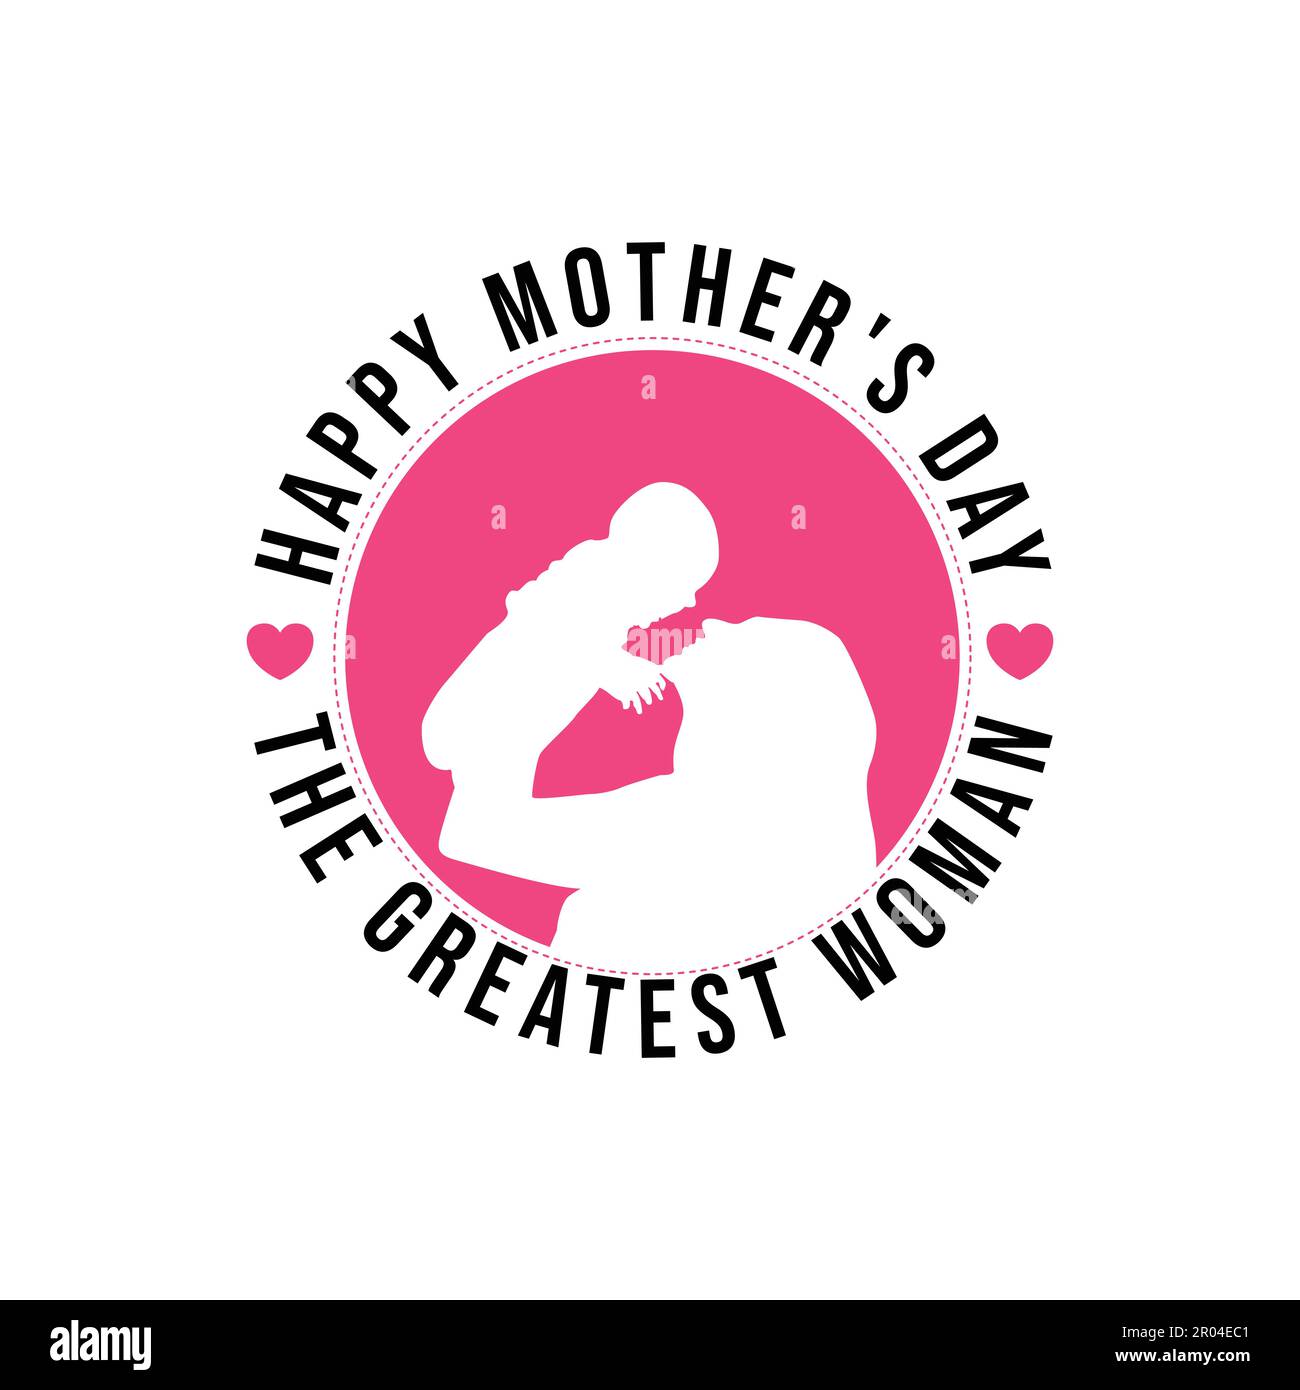 Mom and child illustration for mothers day. Happy mothers day modern calligraphy background vector image Stock Vector